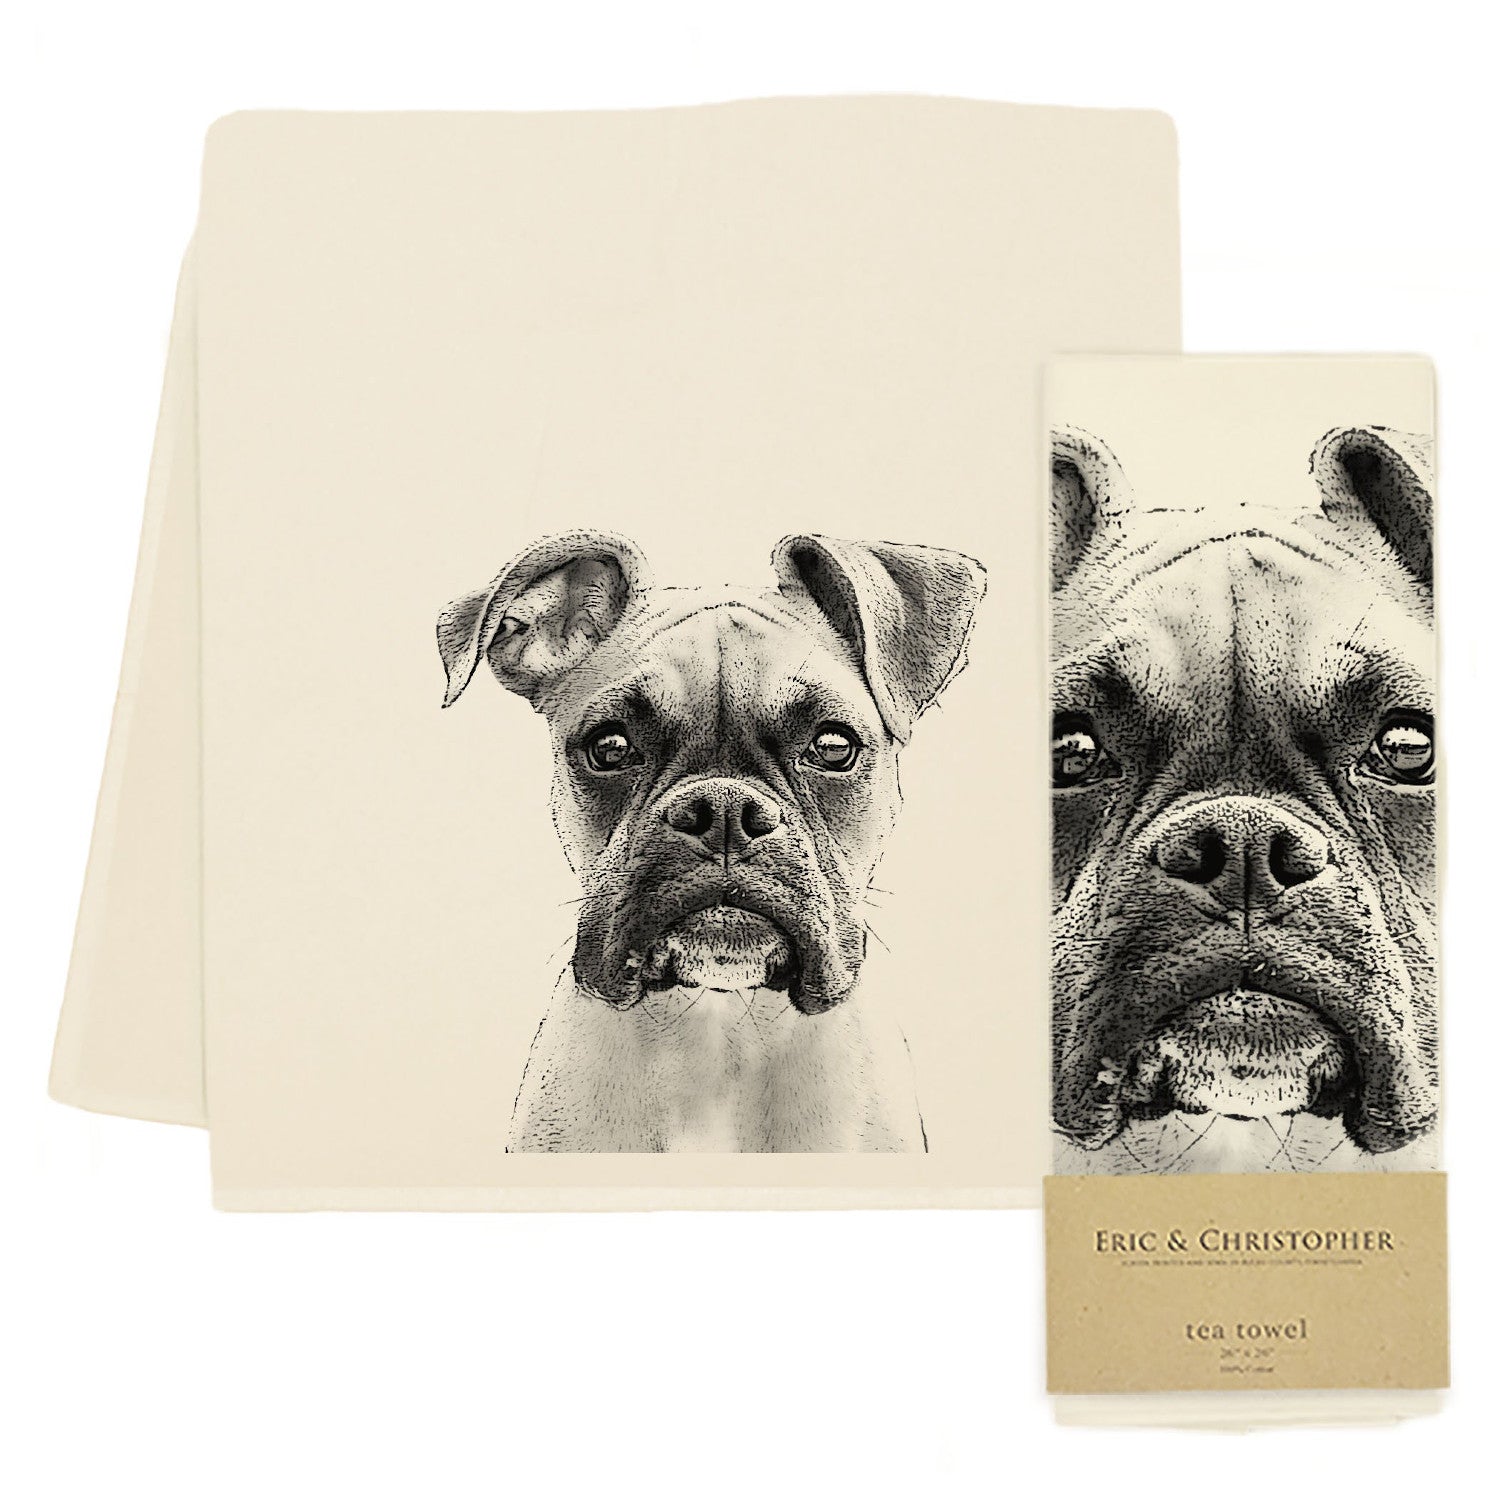 A black and white drawing of a boxer dog on an Eric &amp; Christopher boxer tea towel.